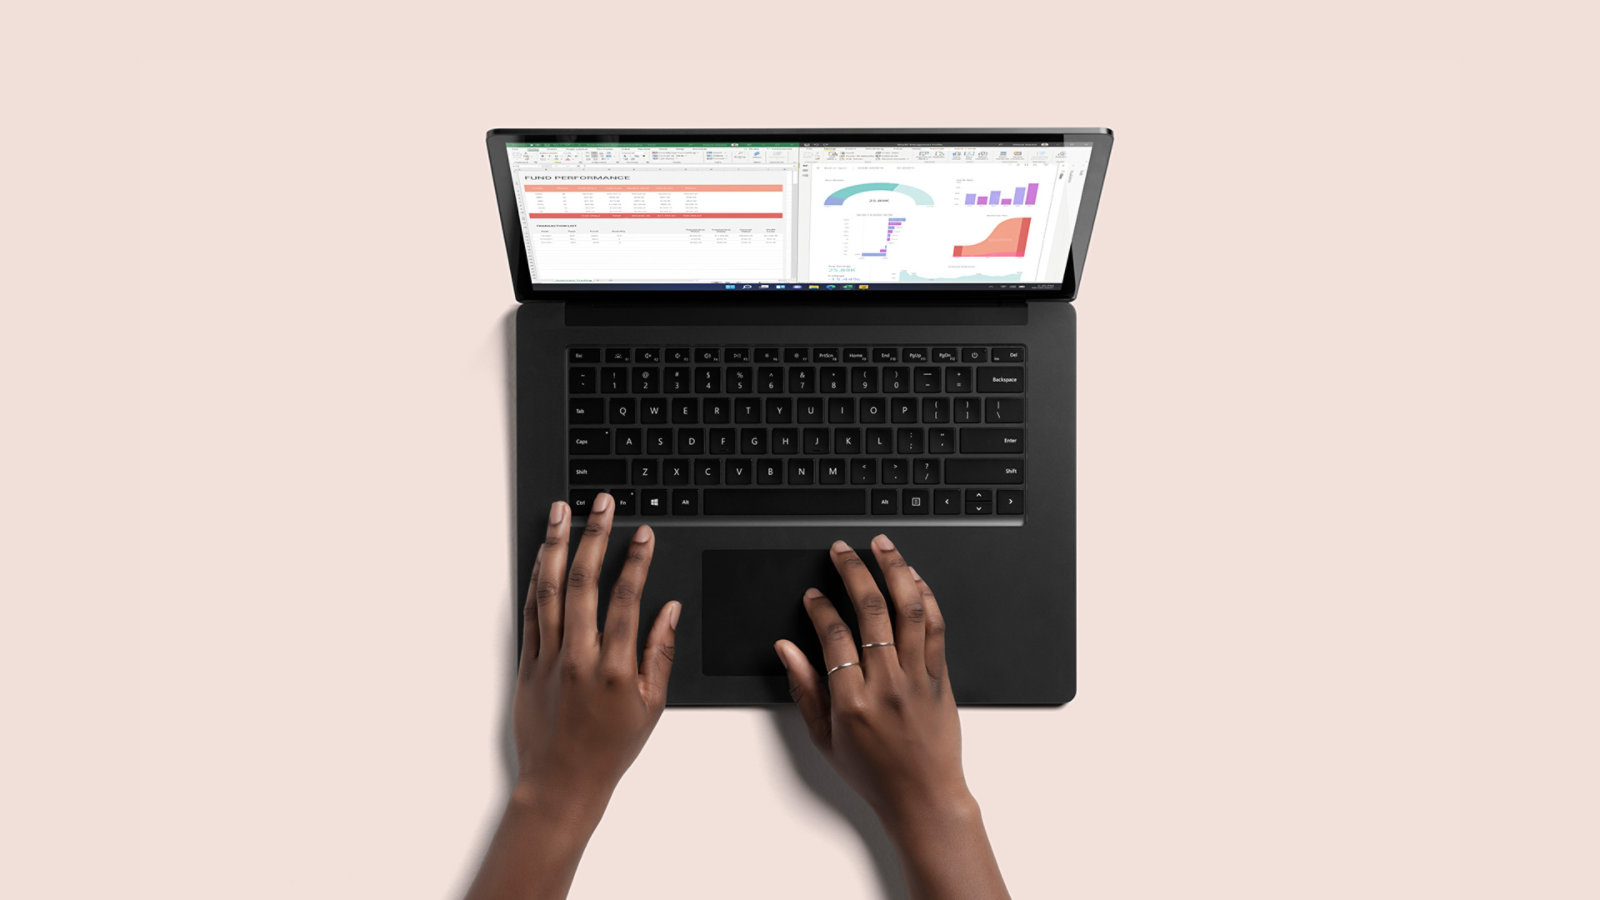 Top down view of Surface Laptop 4 in Black, with two hands typing on the keyboard